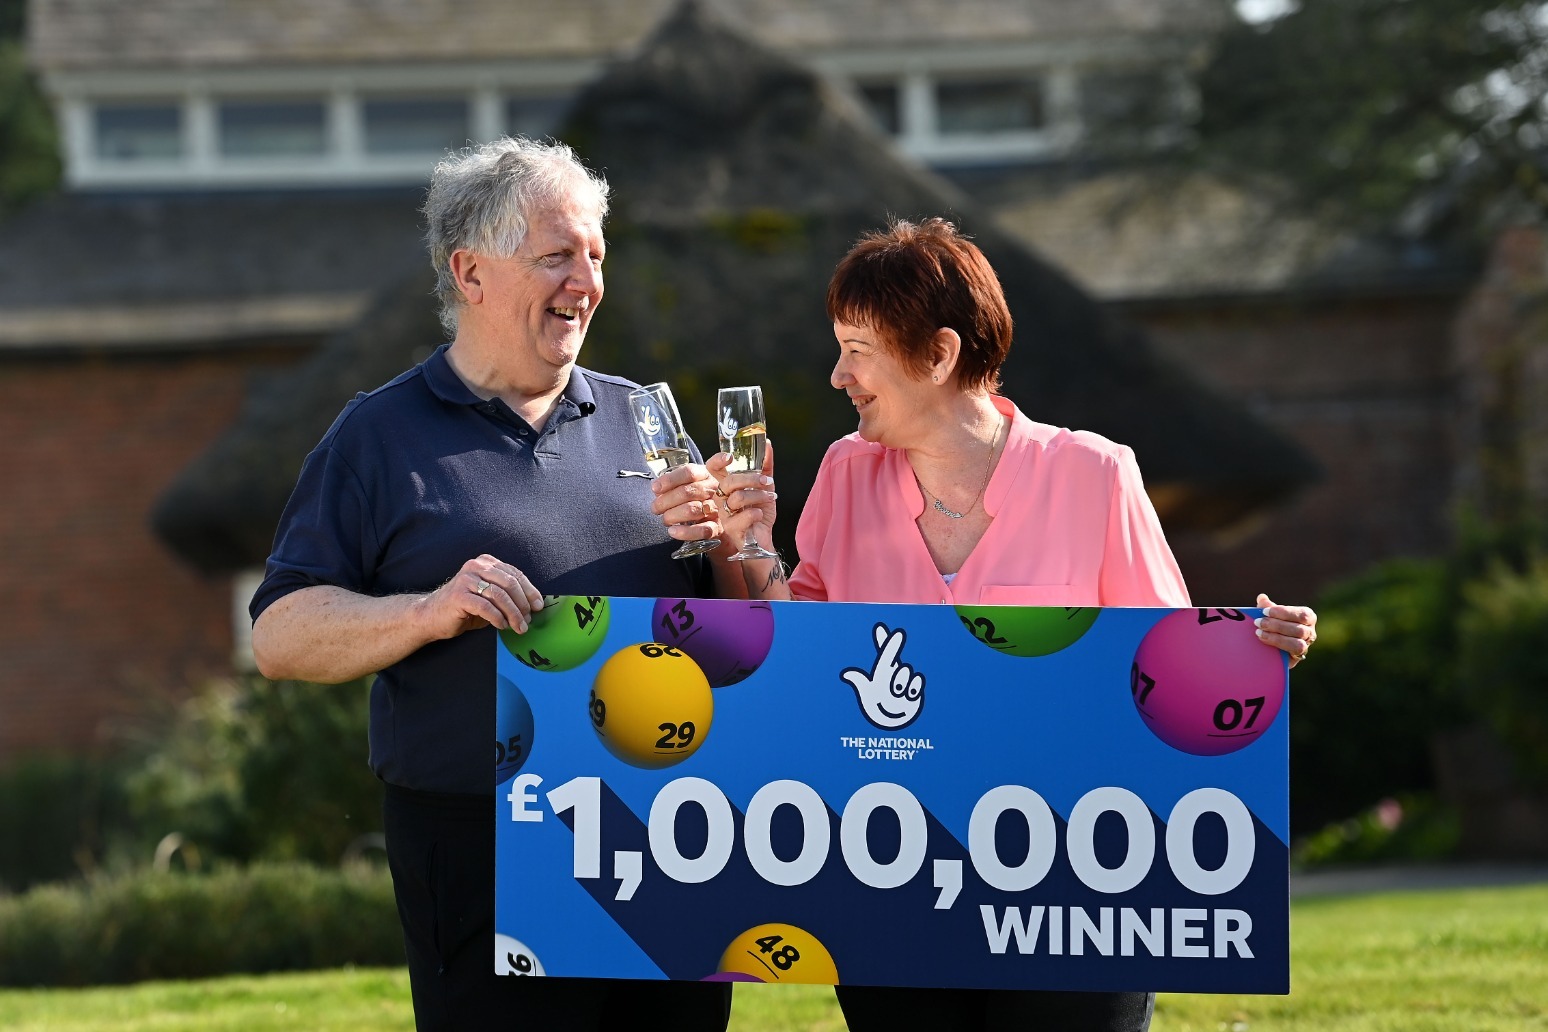 NHS worker will not leave job after lottery win 